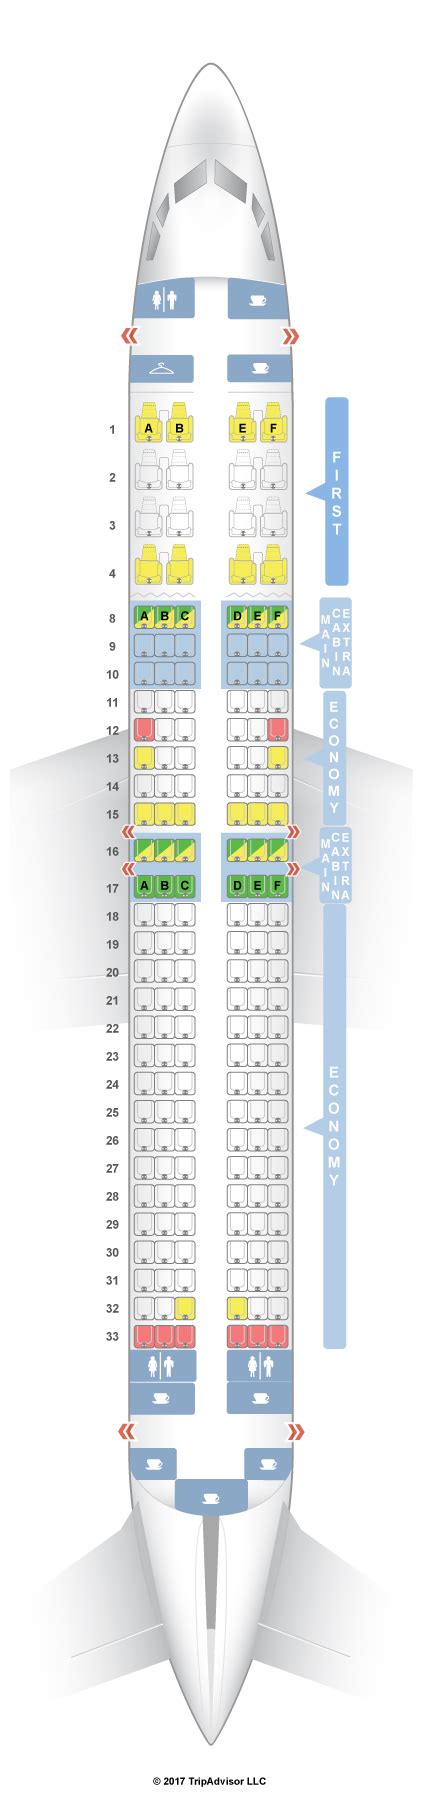 Boeing 737 Max Seating Chart Porn Sex Picture